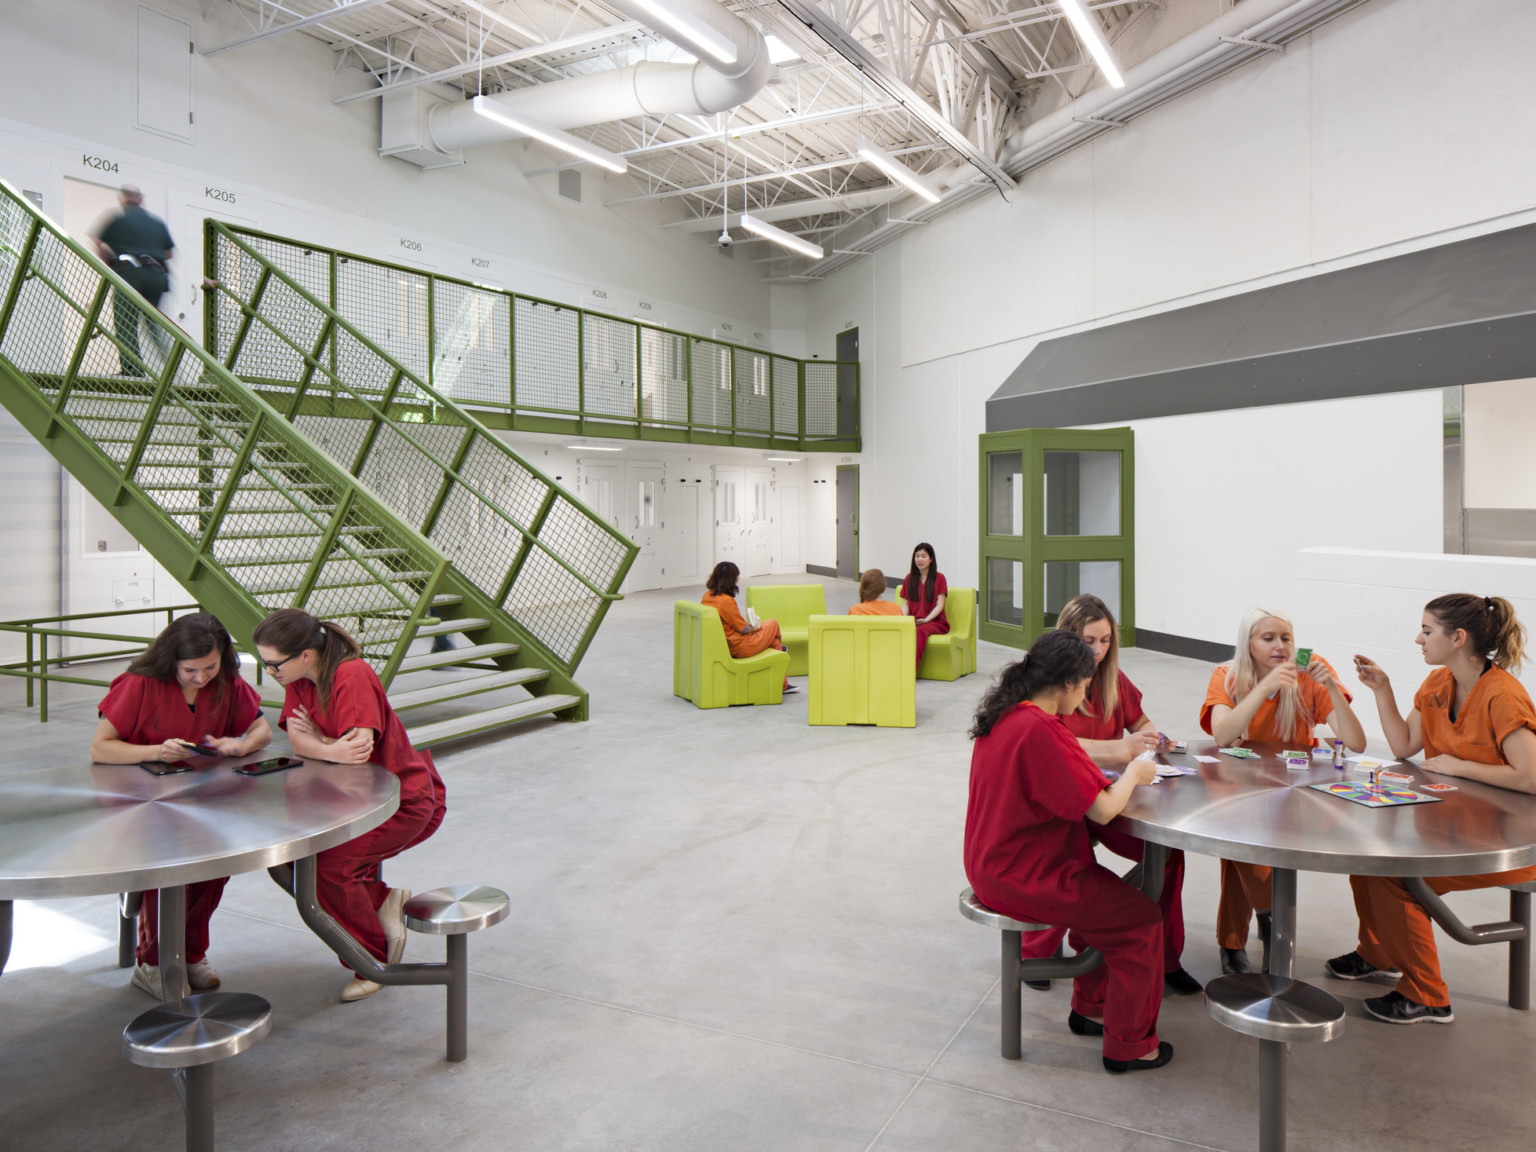 2 levels of cells connected by green stairs and railings leading to central area with green chairs, metal tables with chairs